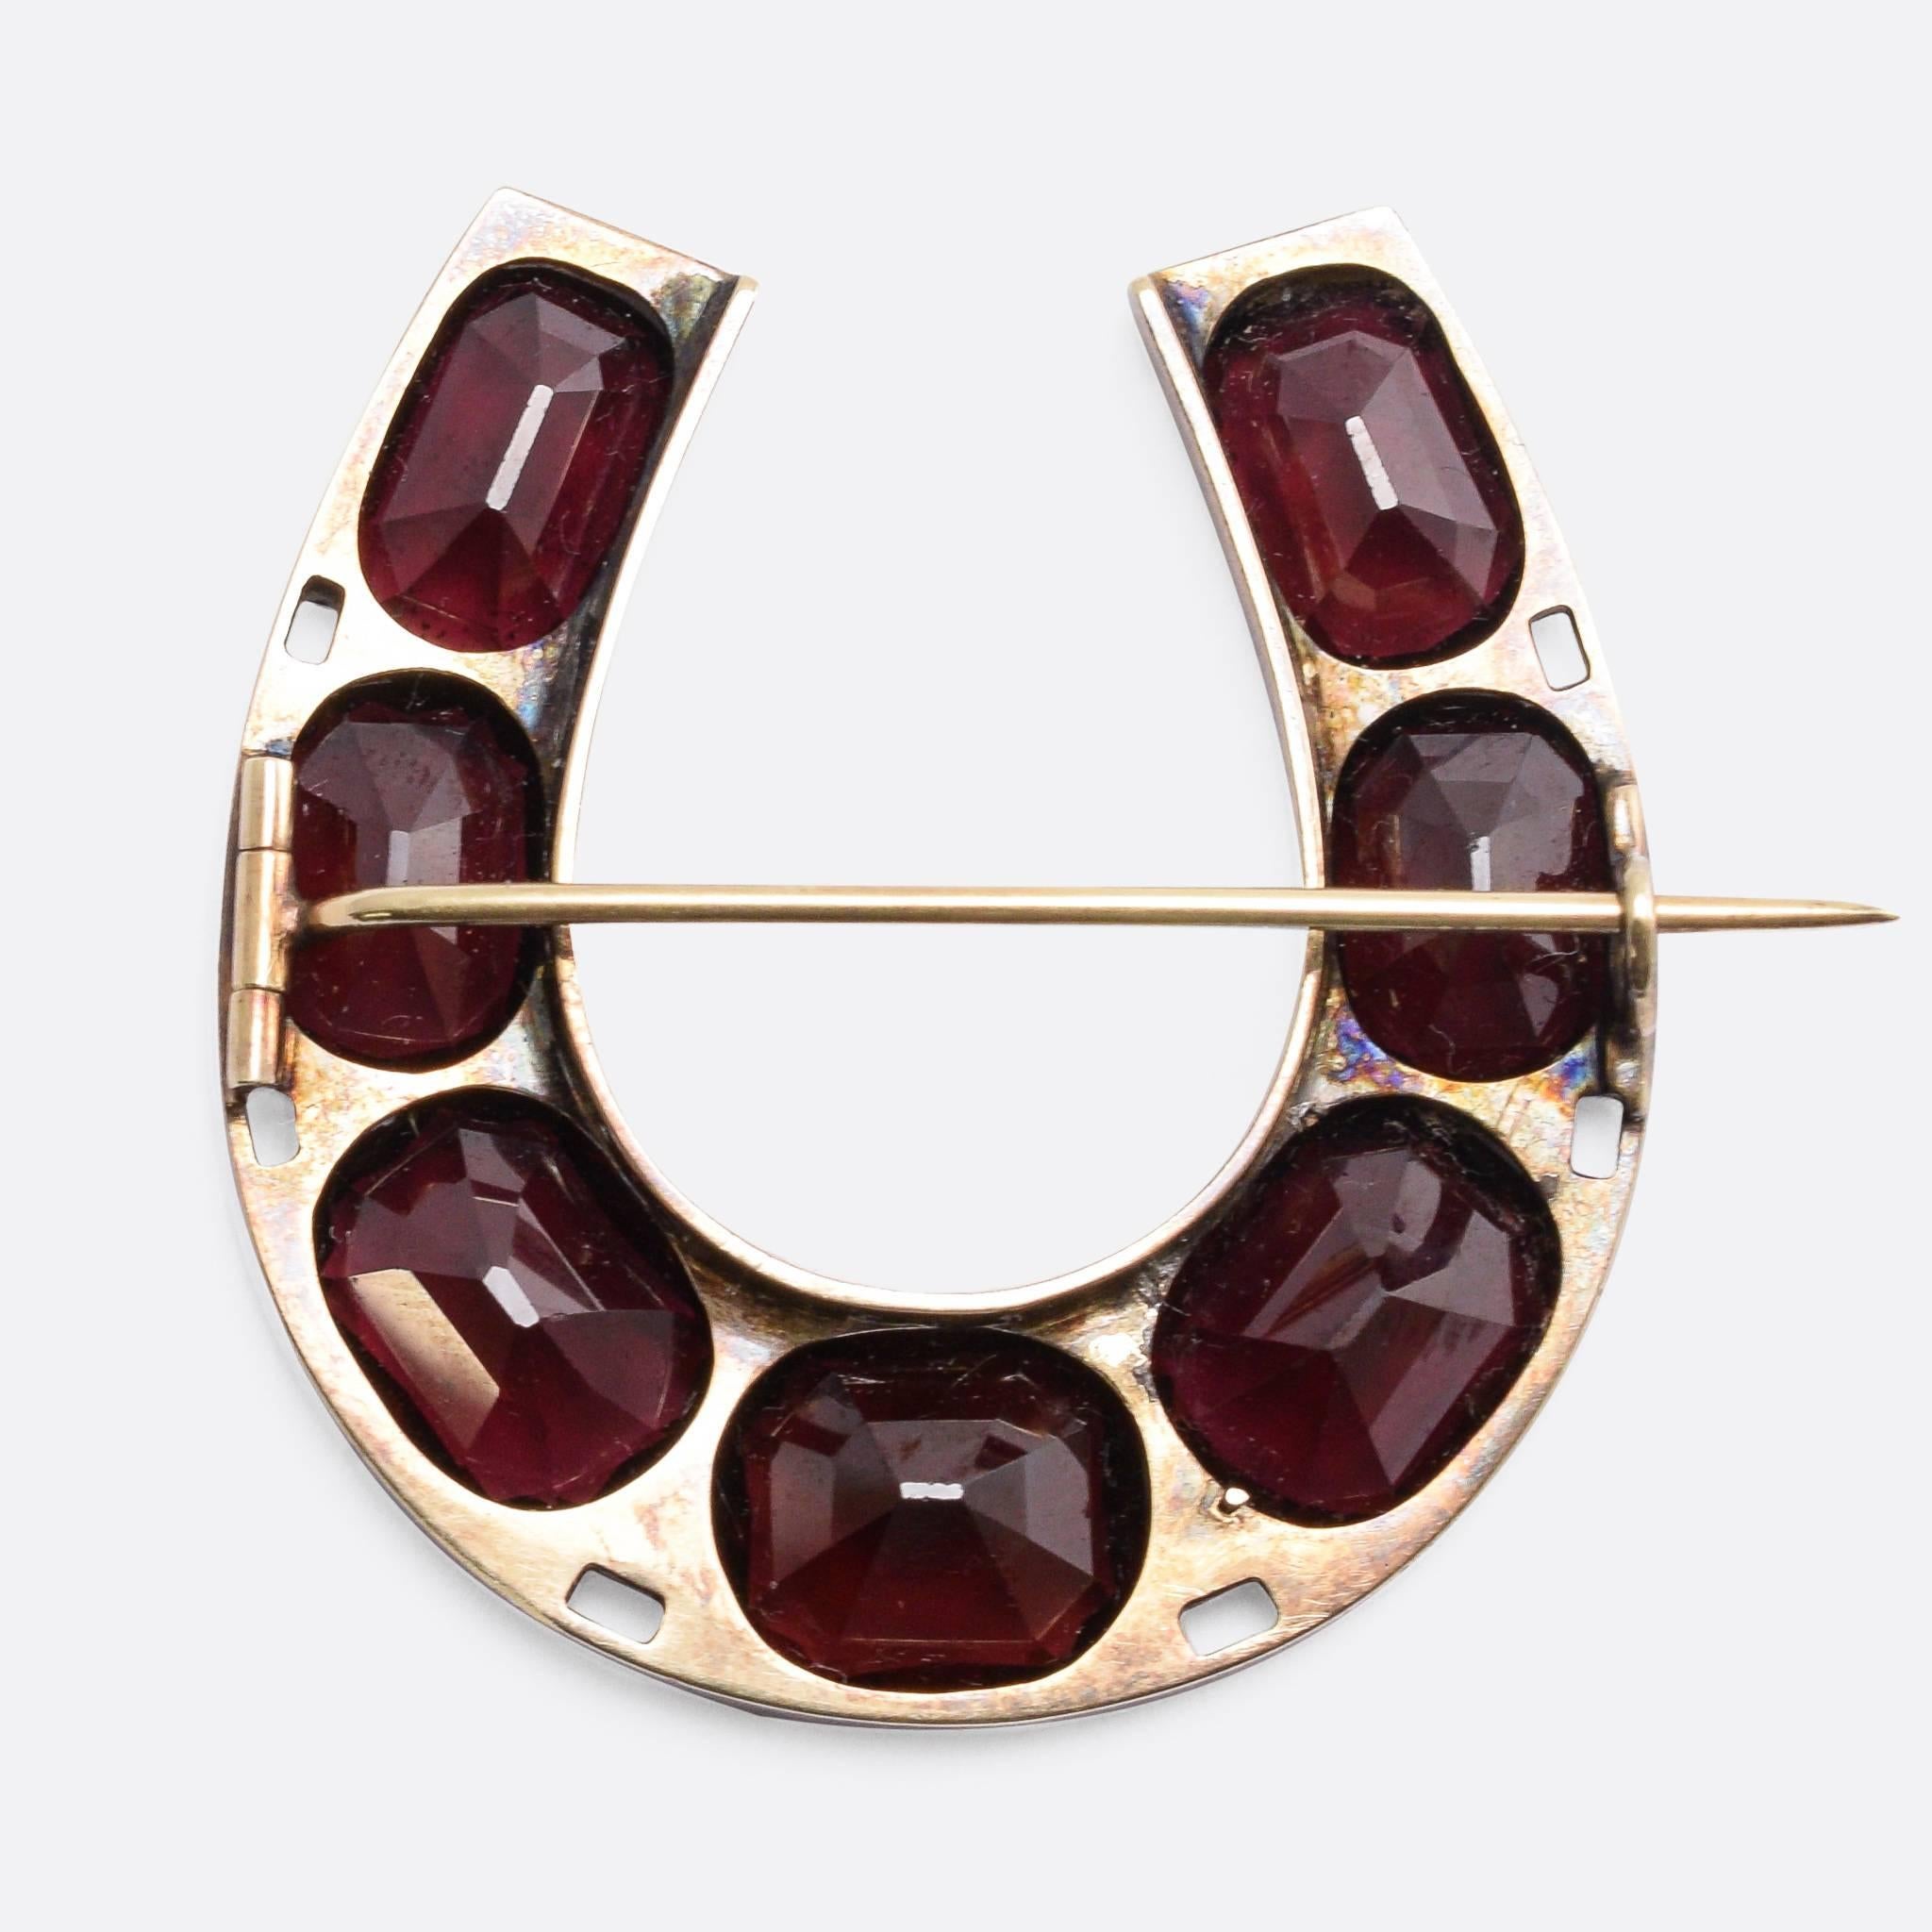 This exceptional late Victorian oversized horseshoe brooch is set with flat cut garnets, and rose cut diamonds. It measures 3.8cm across - a bold statement piece, with gorgeous deep-red stones. Modelled in 15k gold.